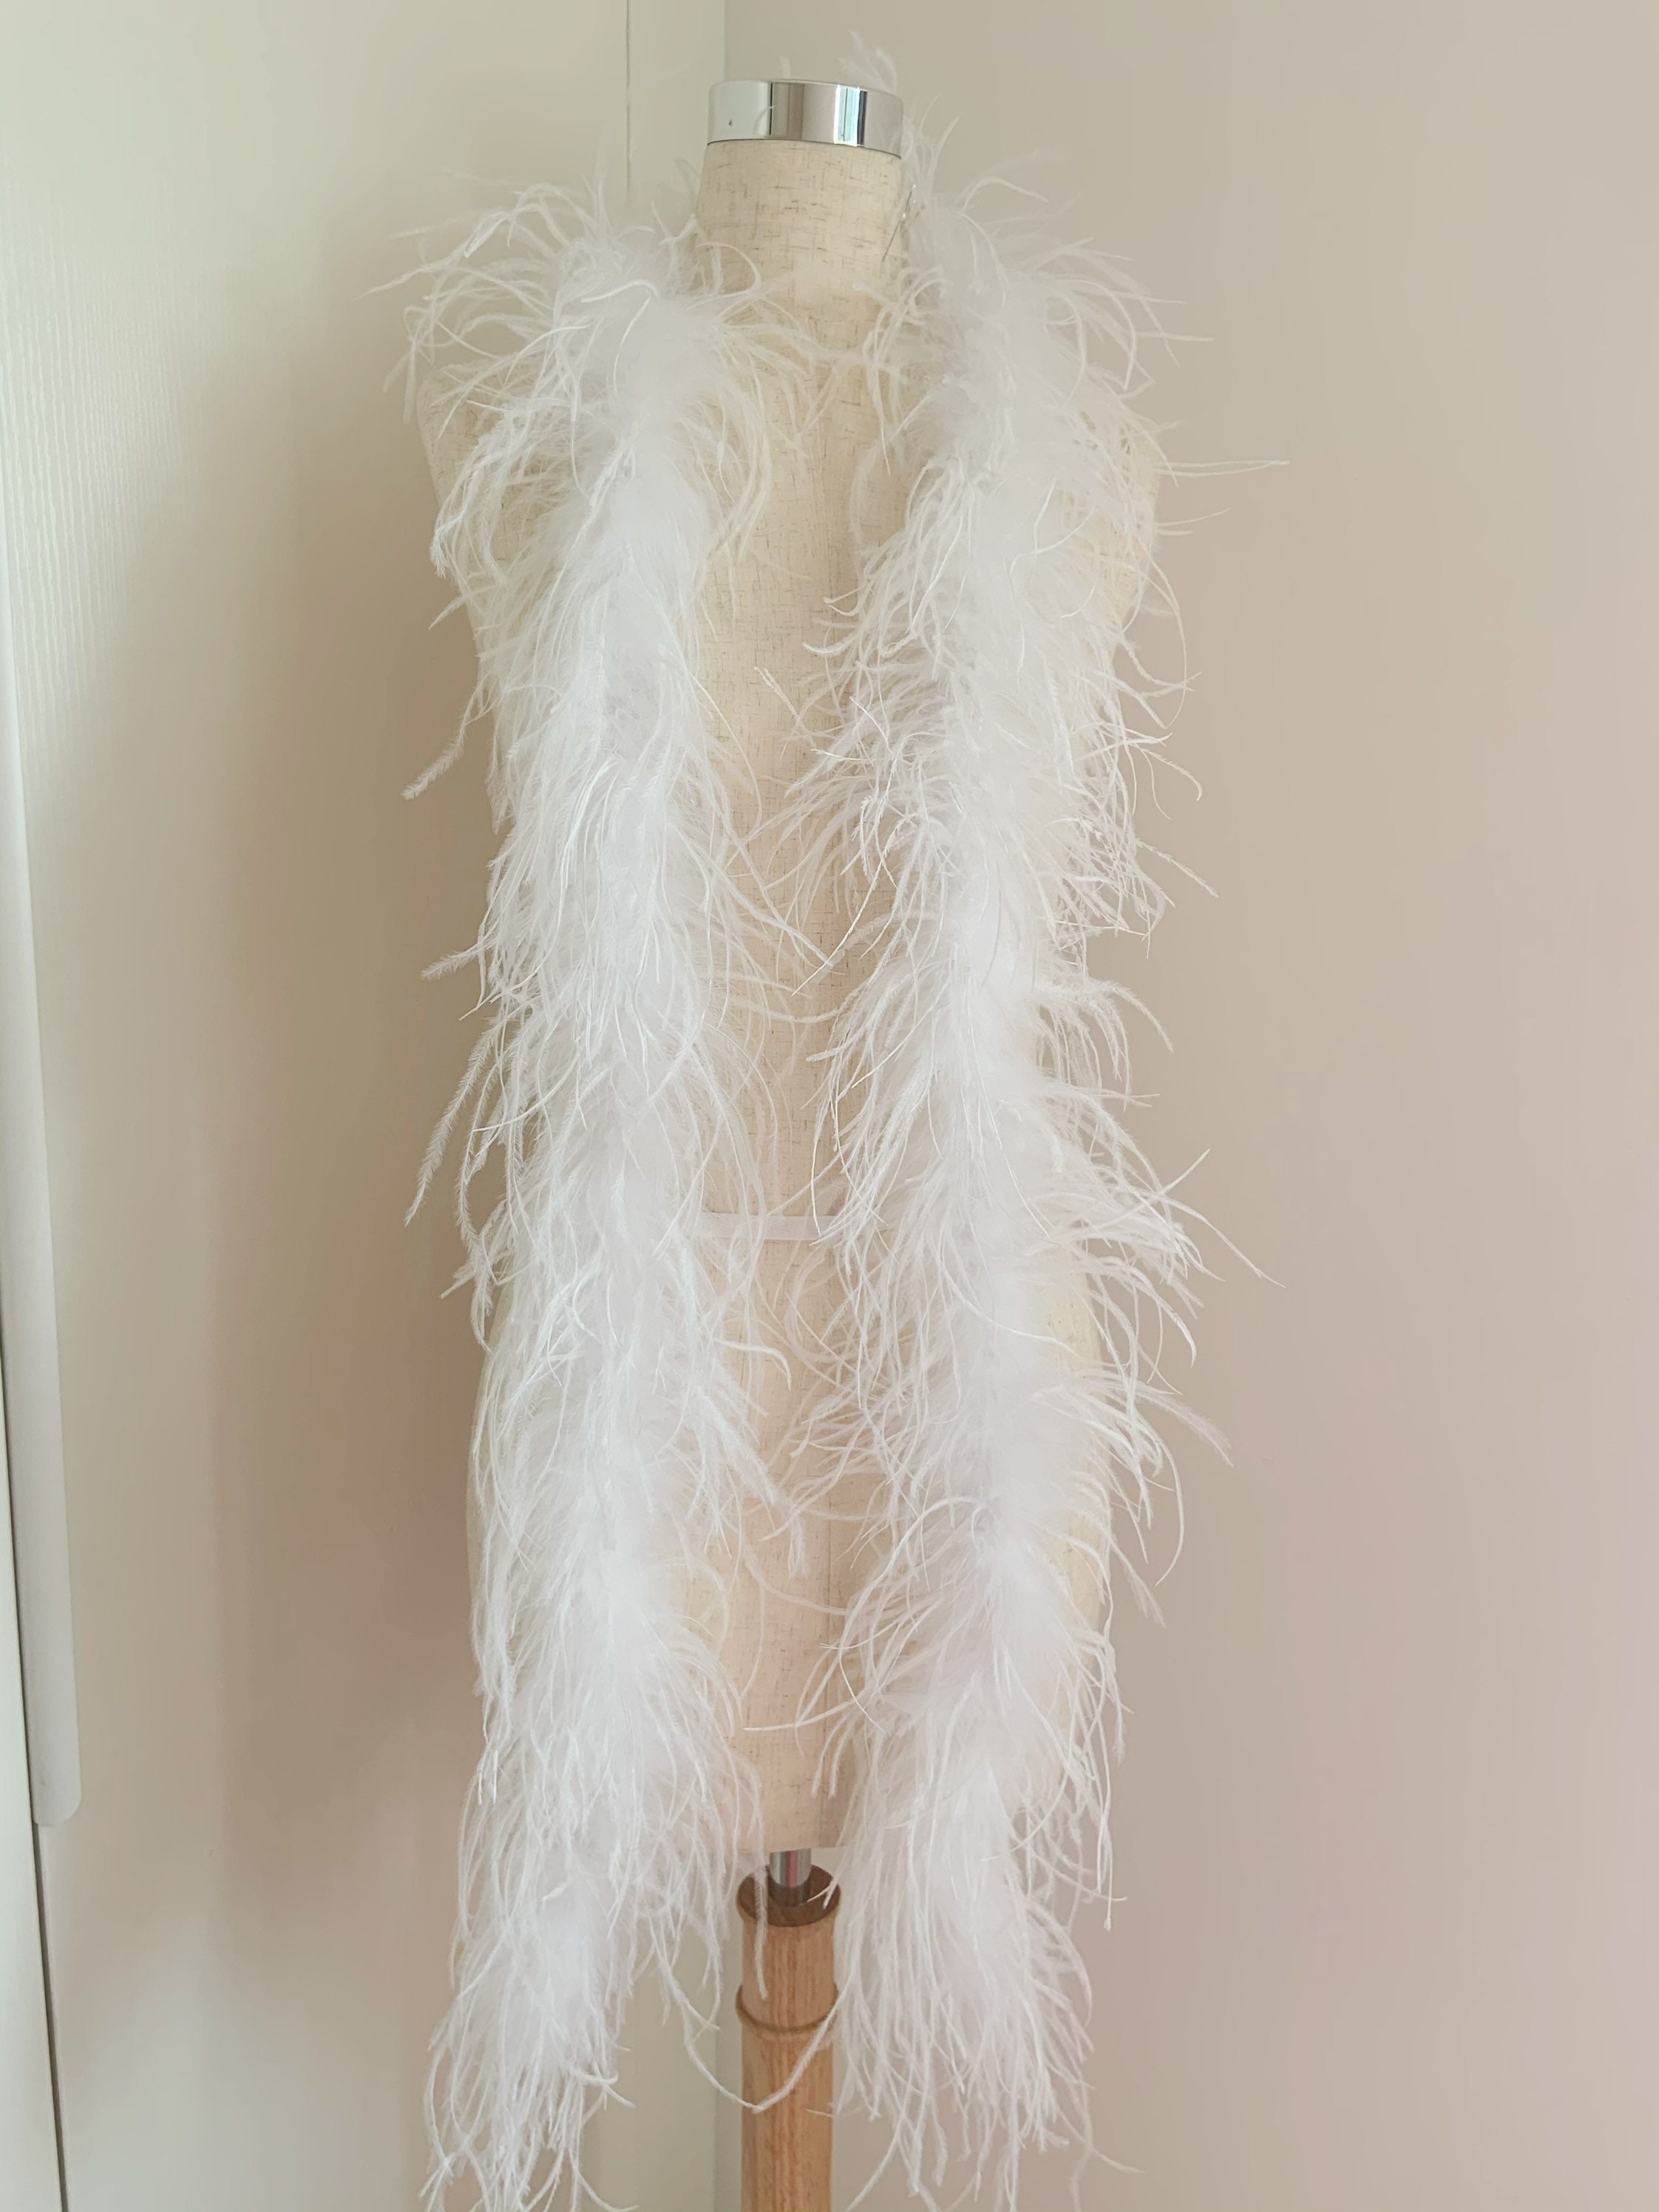 Zucker Value Two-Ply Twilight Ostrich Feather Boa for Sale |buy 2 Ply Ostrich Feather Boa